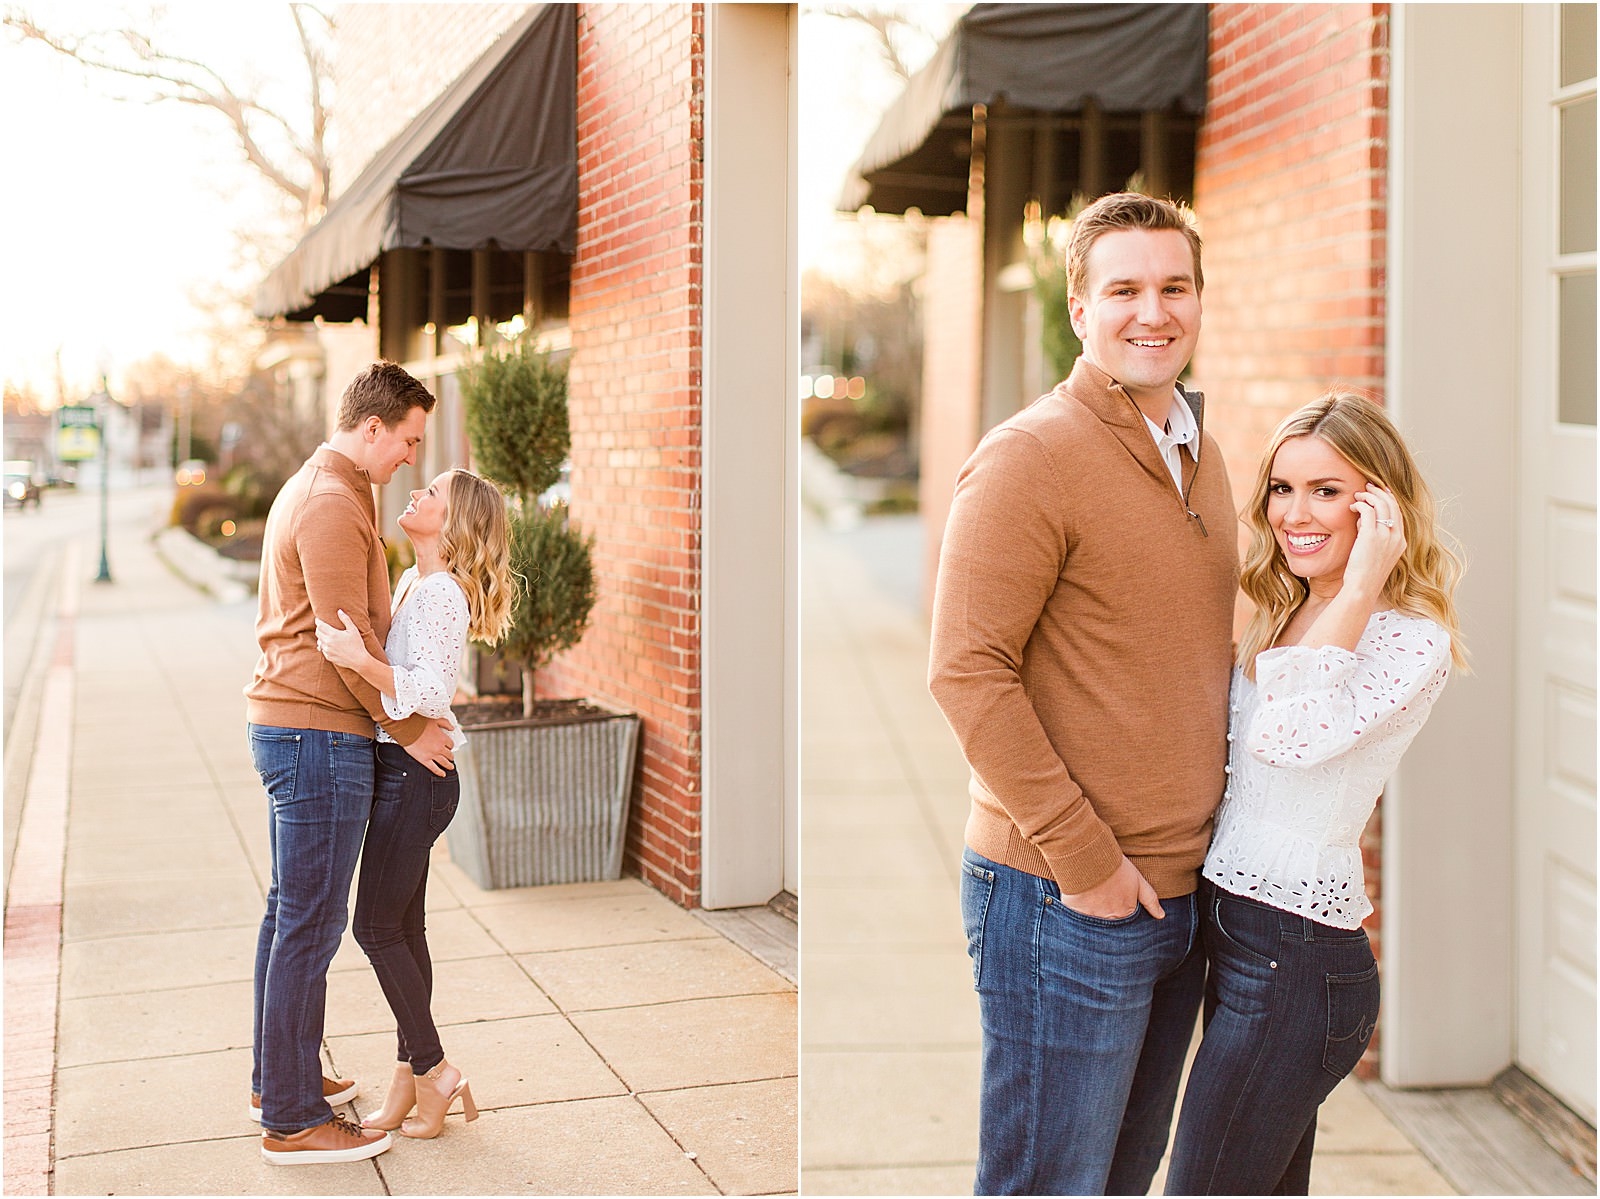 Madison and Christaan | A 20 West Engagement Session in Downto wn Newburgh | Bret and Brandie Photography043.jpg